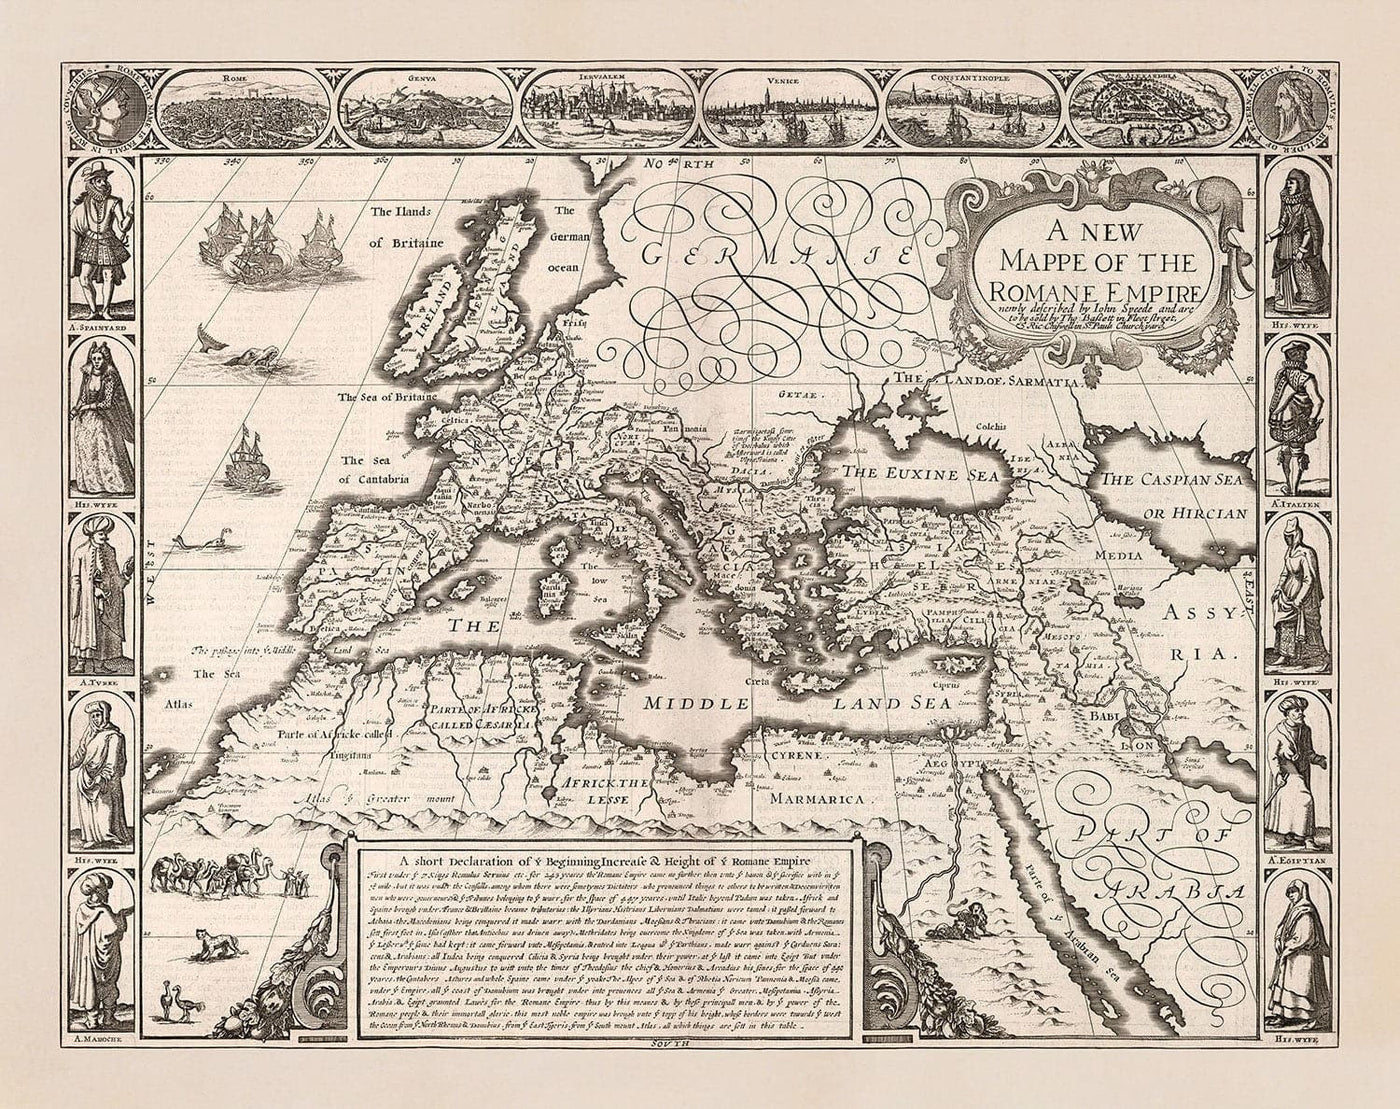 Old Roman Empire Map, 1676 by John Speed - Mediterranean, Byzantine, Middle East, North Africa